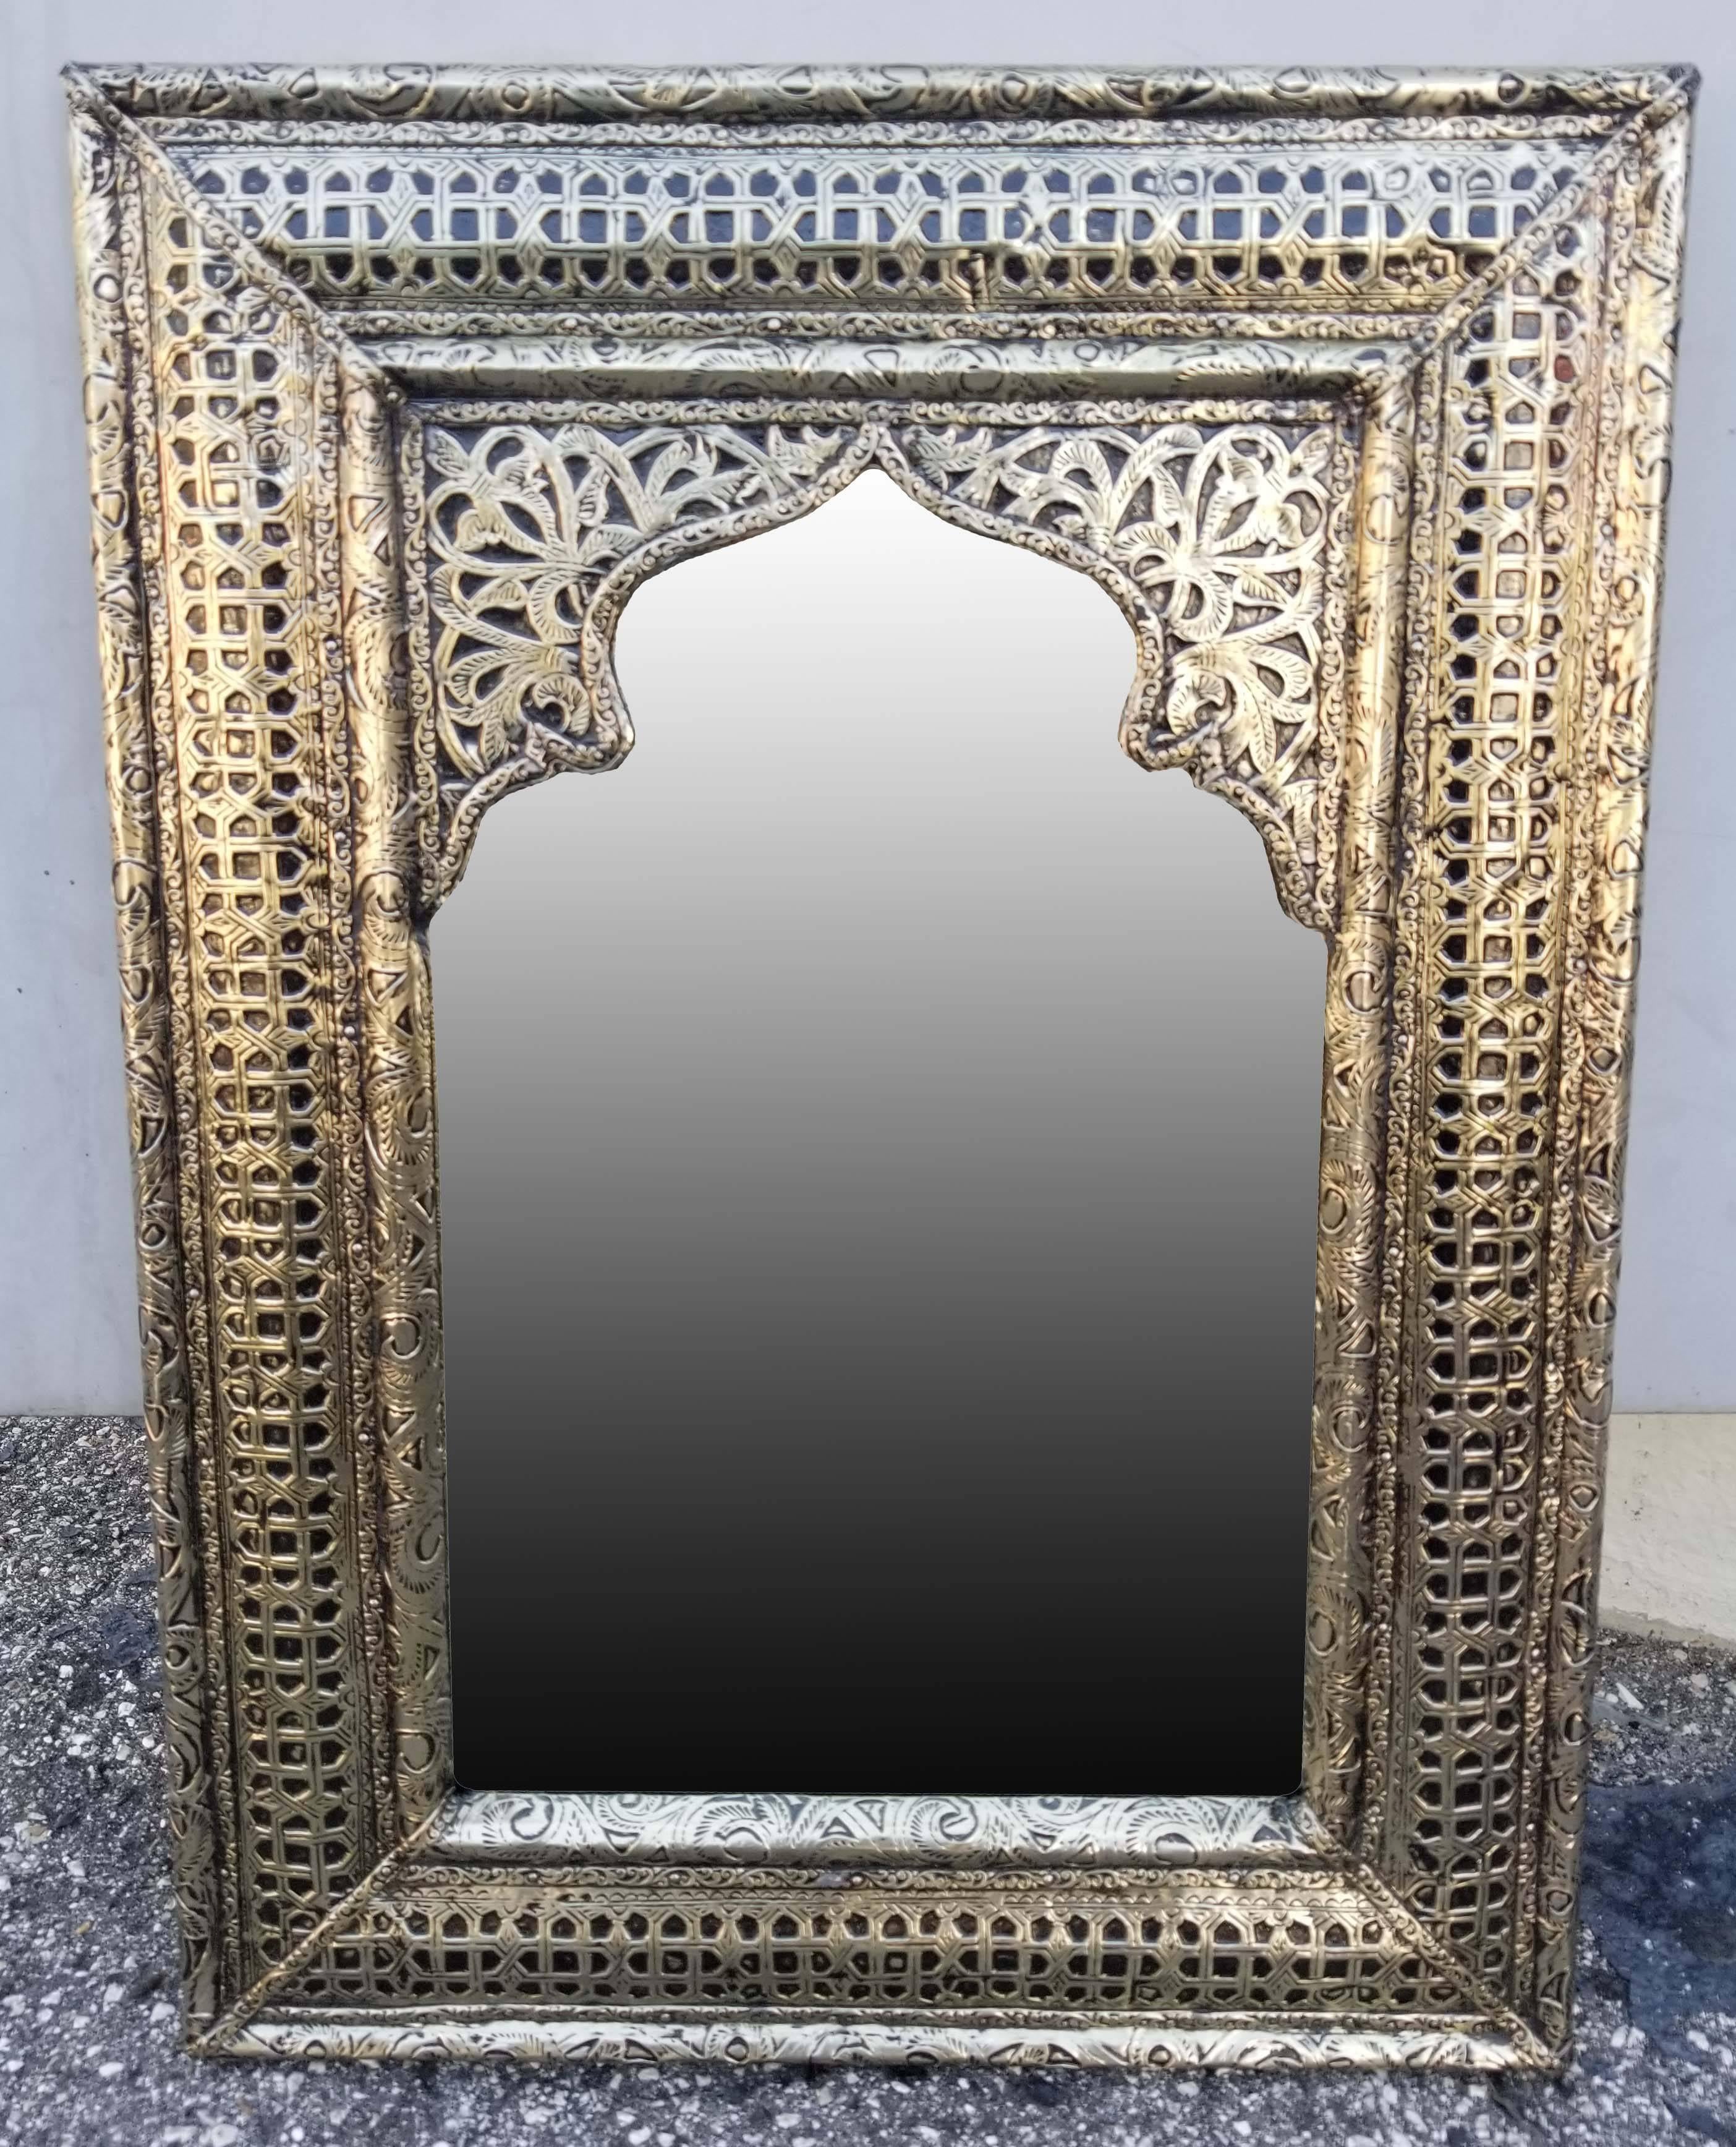 Large metal inlaid and camel bone Moroccan mirror. Made in the city of Marrakech. Rectangular shape measuring approximately 24